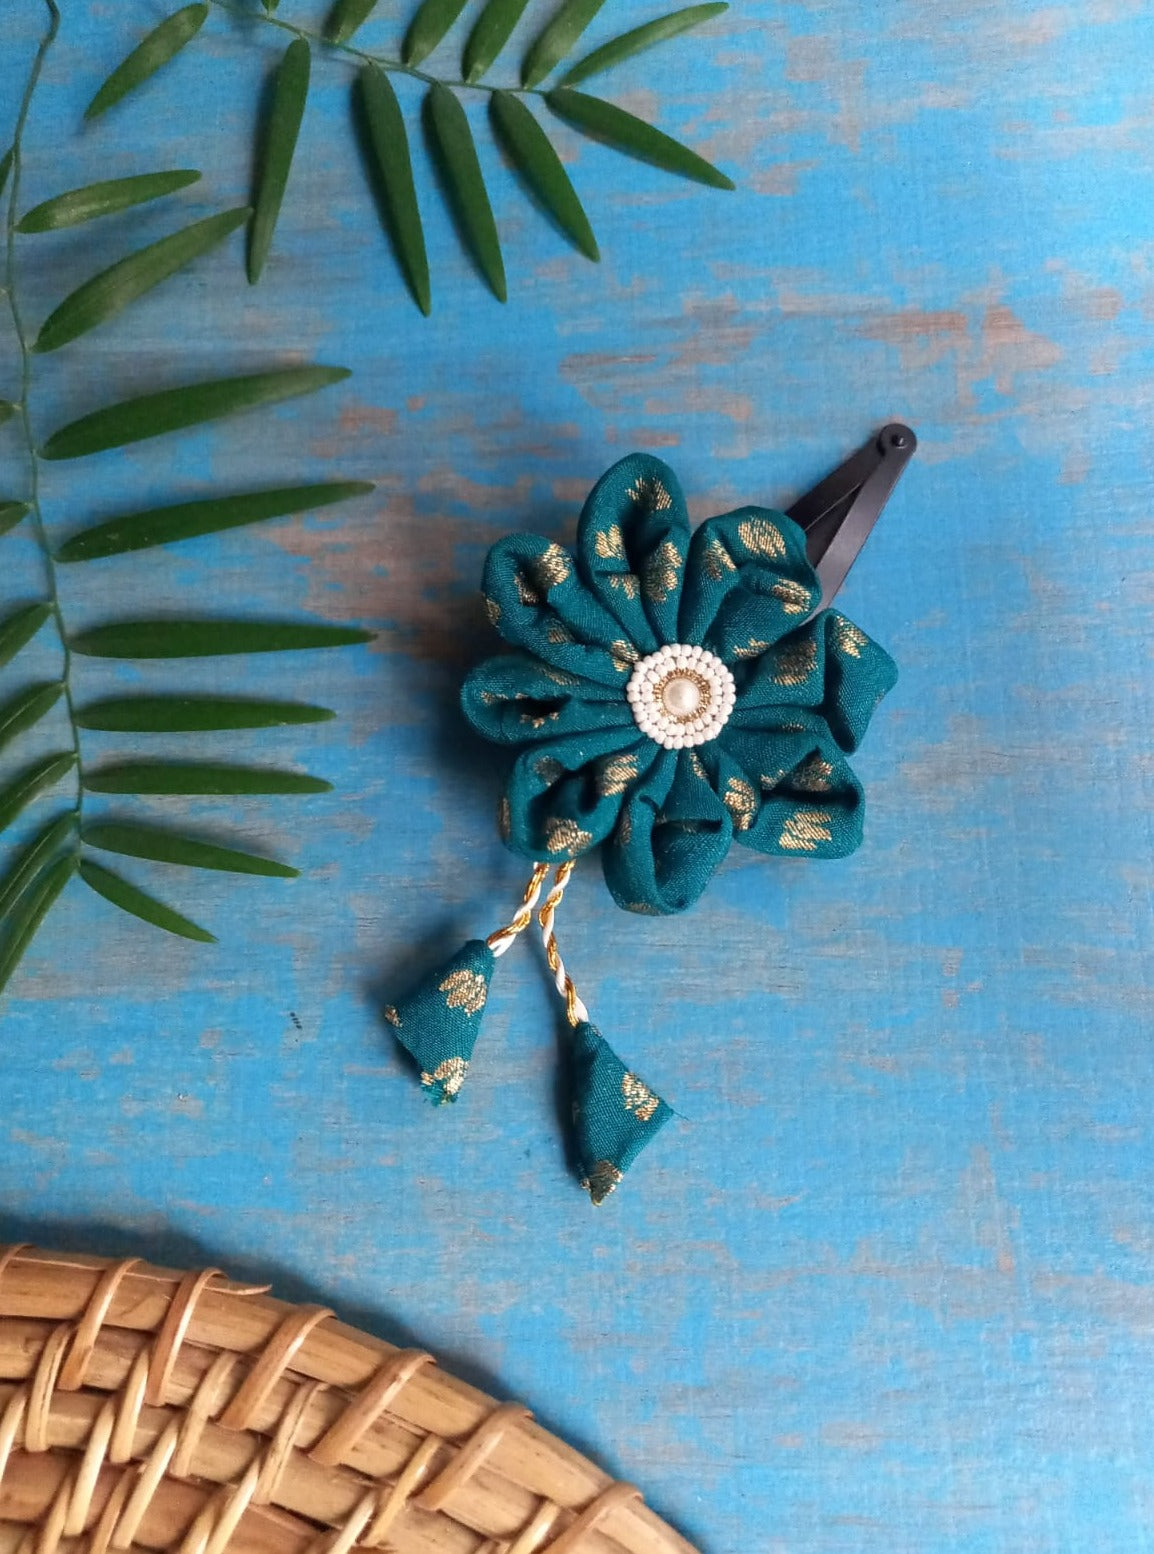 Teal Green Dahlia flower handcrafted hairclip with matching danglers.